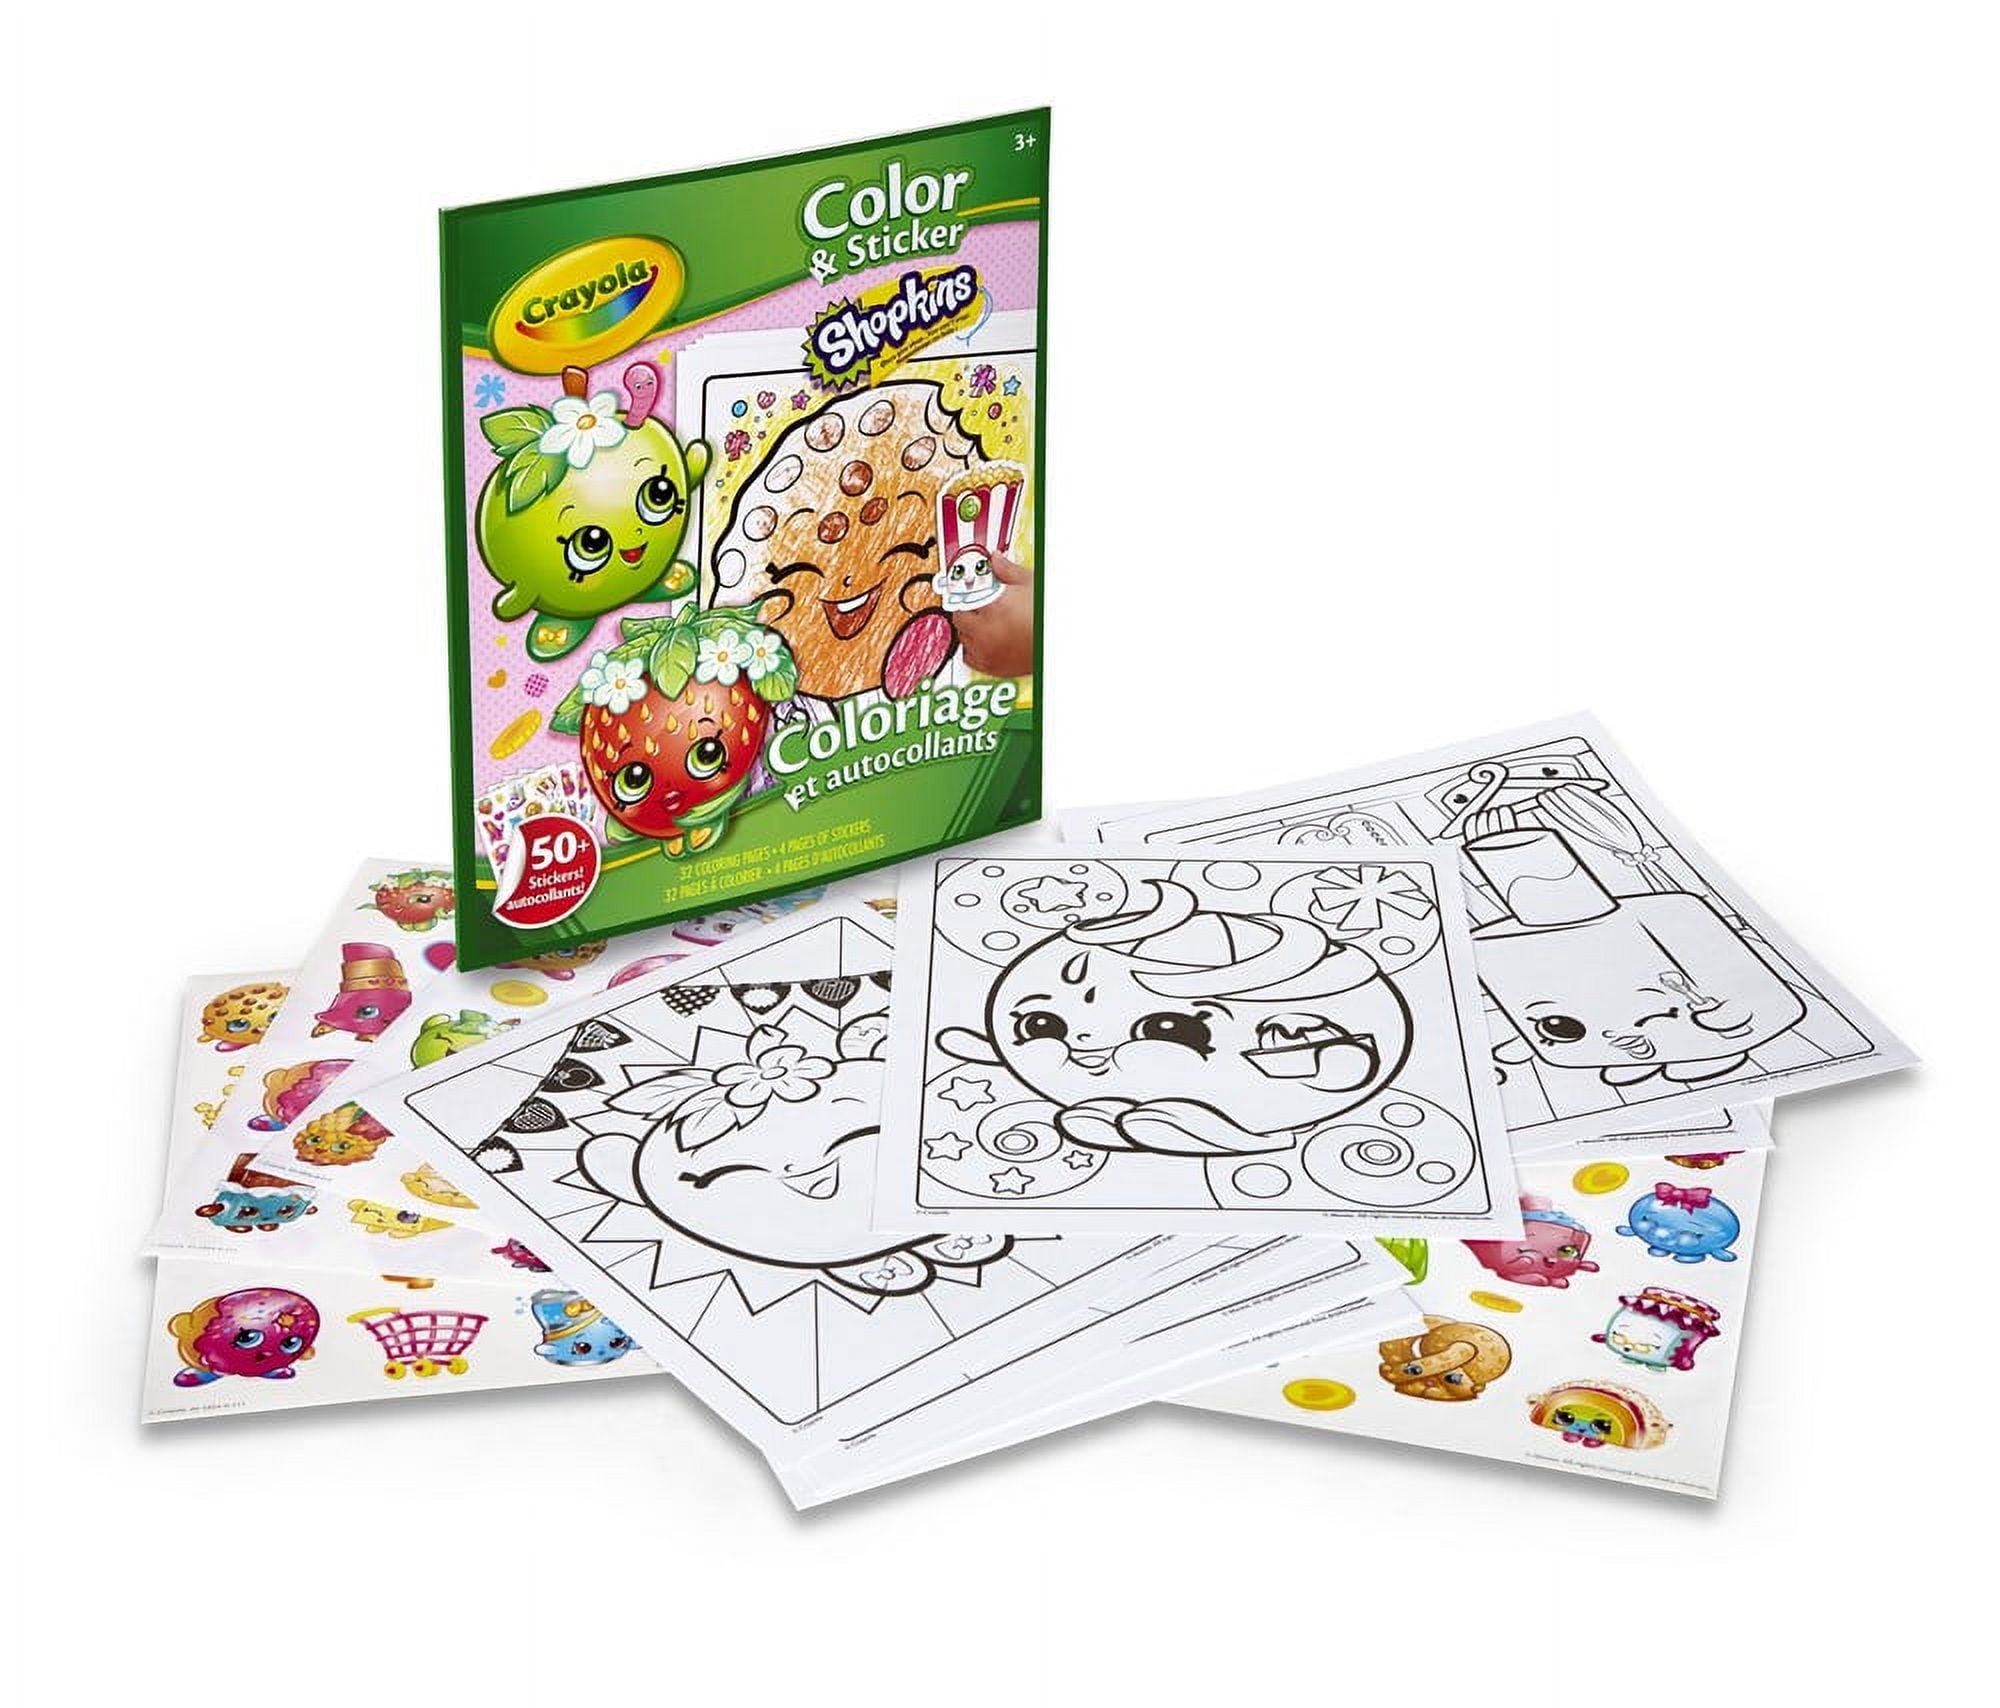 Shopkins Play Pack Grab & Go Coloring Book, Markers and Stickers